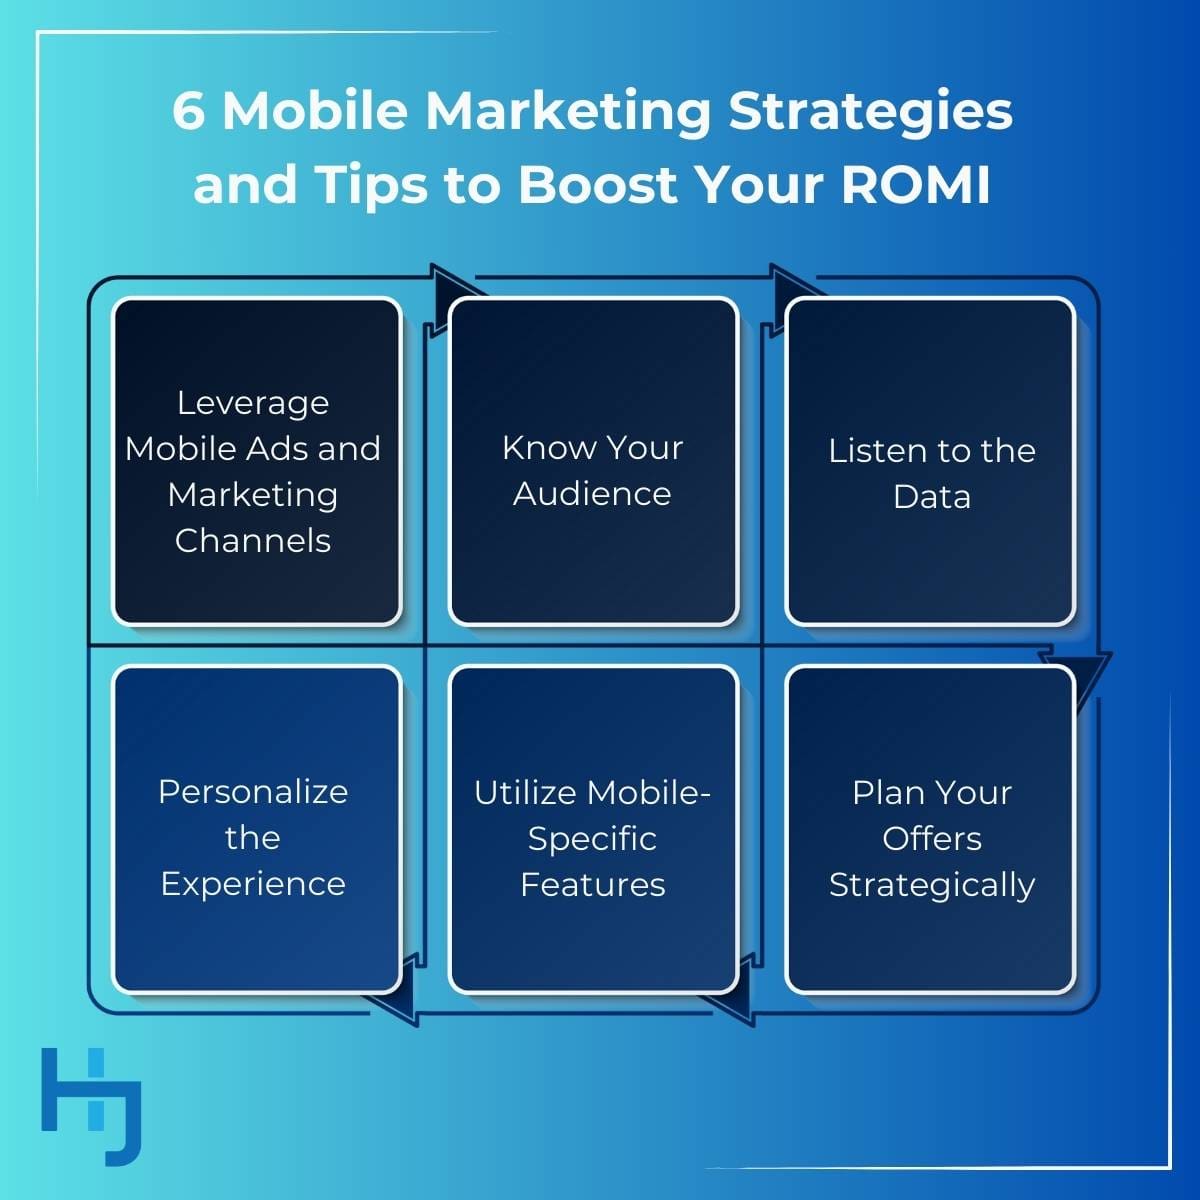 6 Mobile Marketing Strategies and Tips to Boost Your ROMI